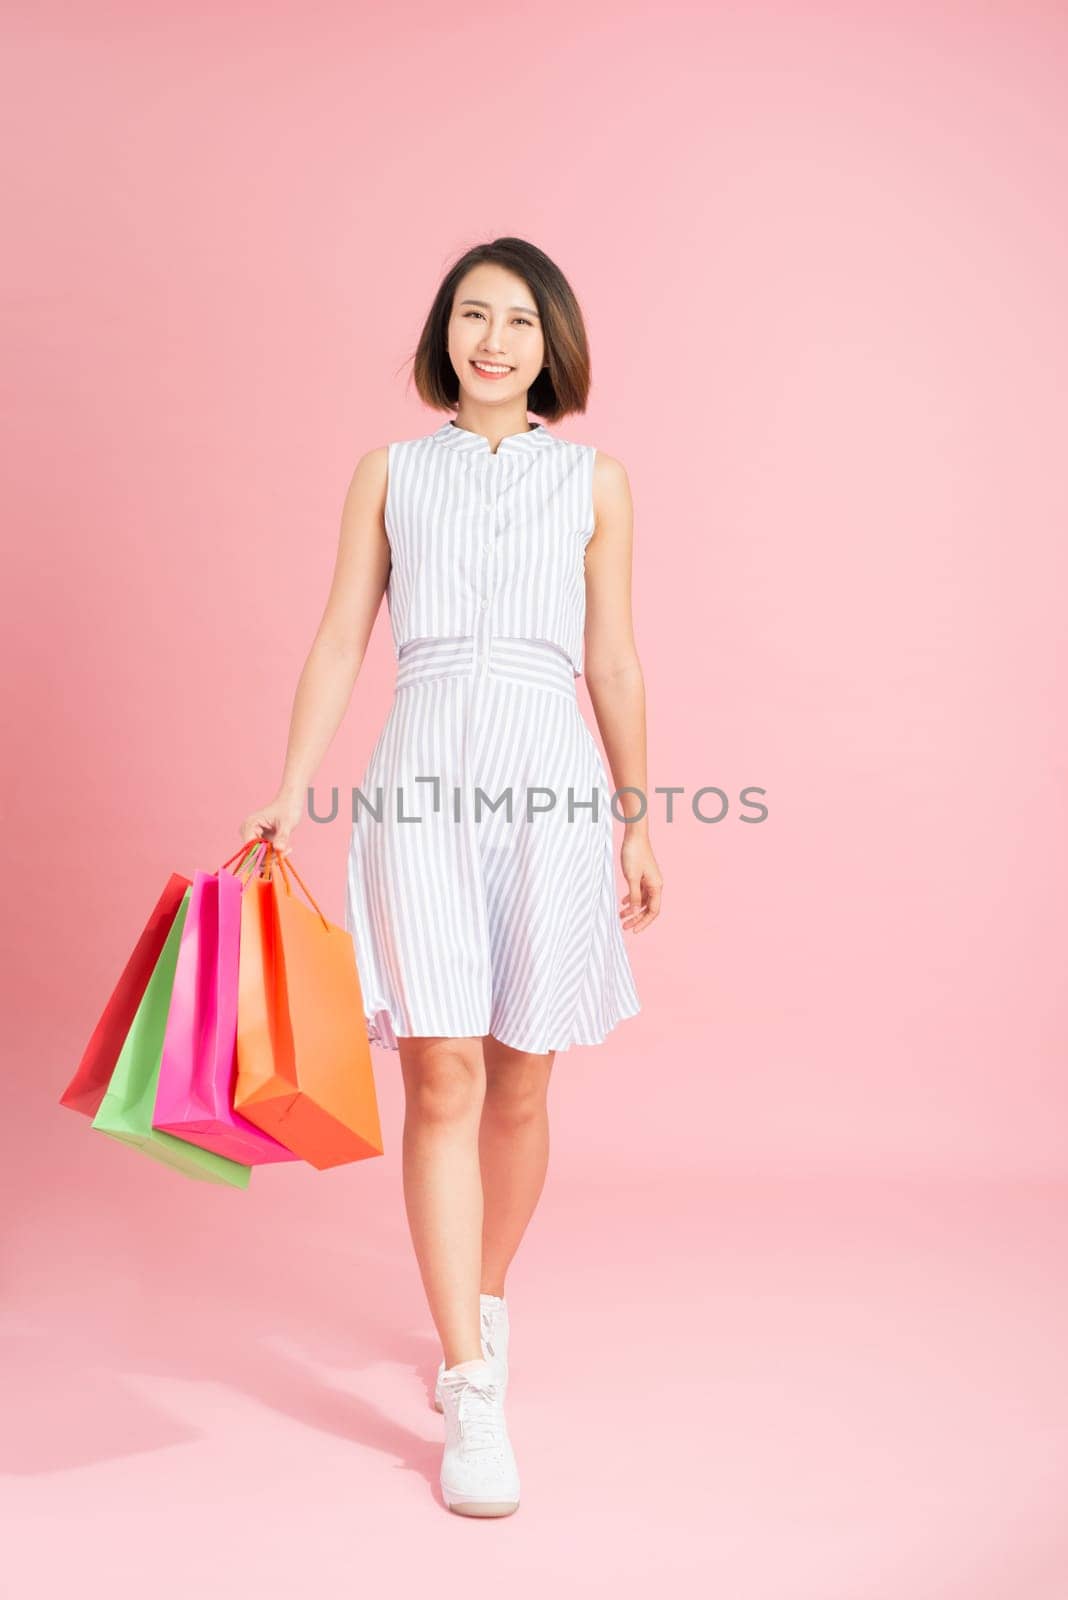 fashionable woman with packages on a pink background